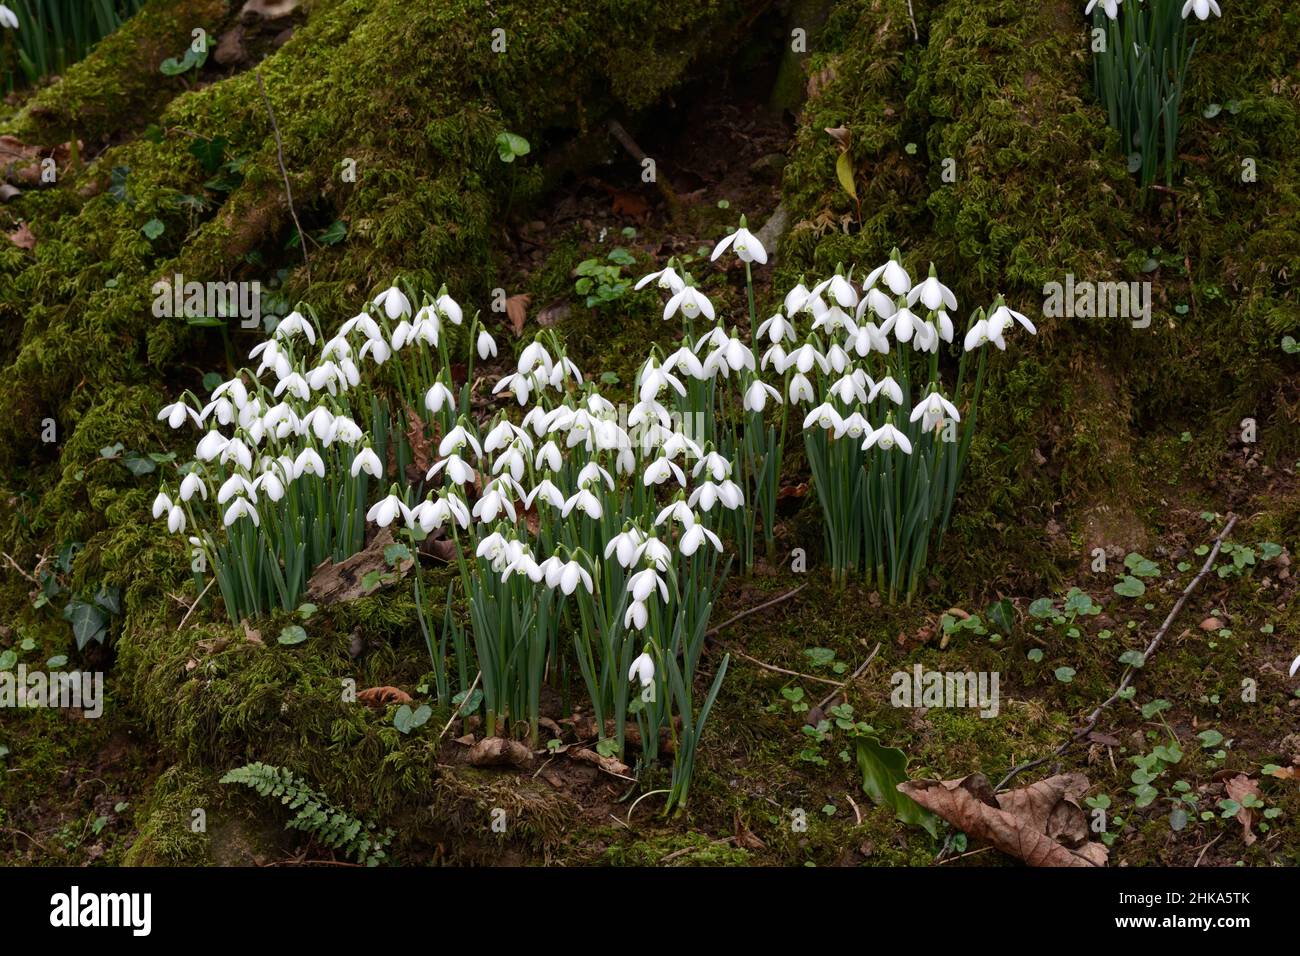 Native snowdrops Galanthus nivalis small white early spring flowers on a woodland floor Stock Photo